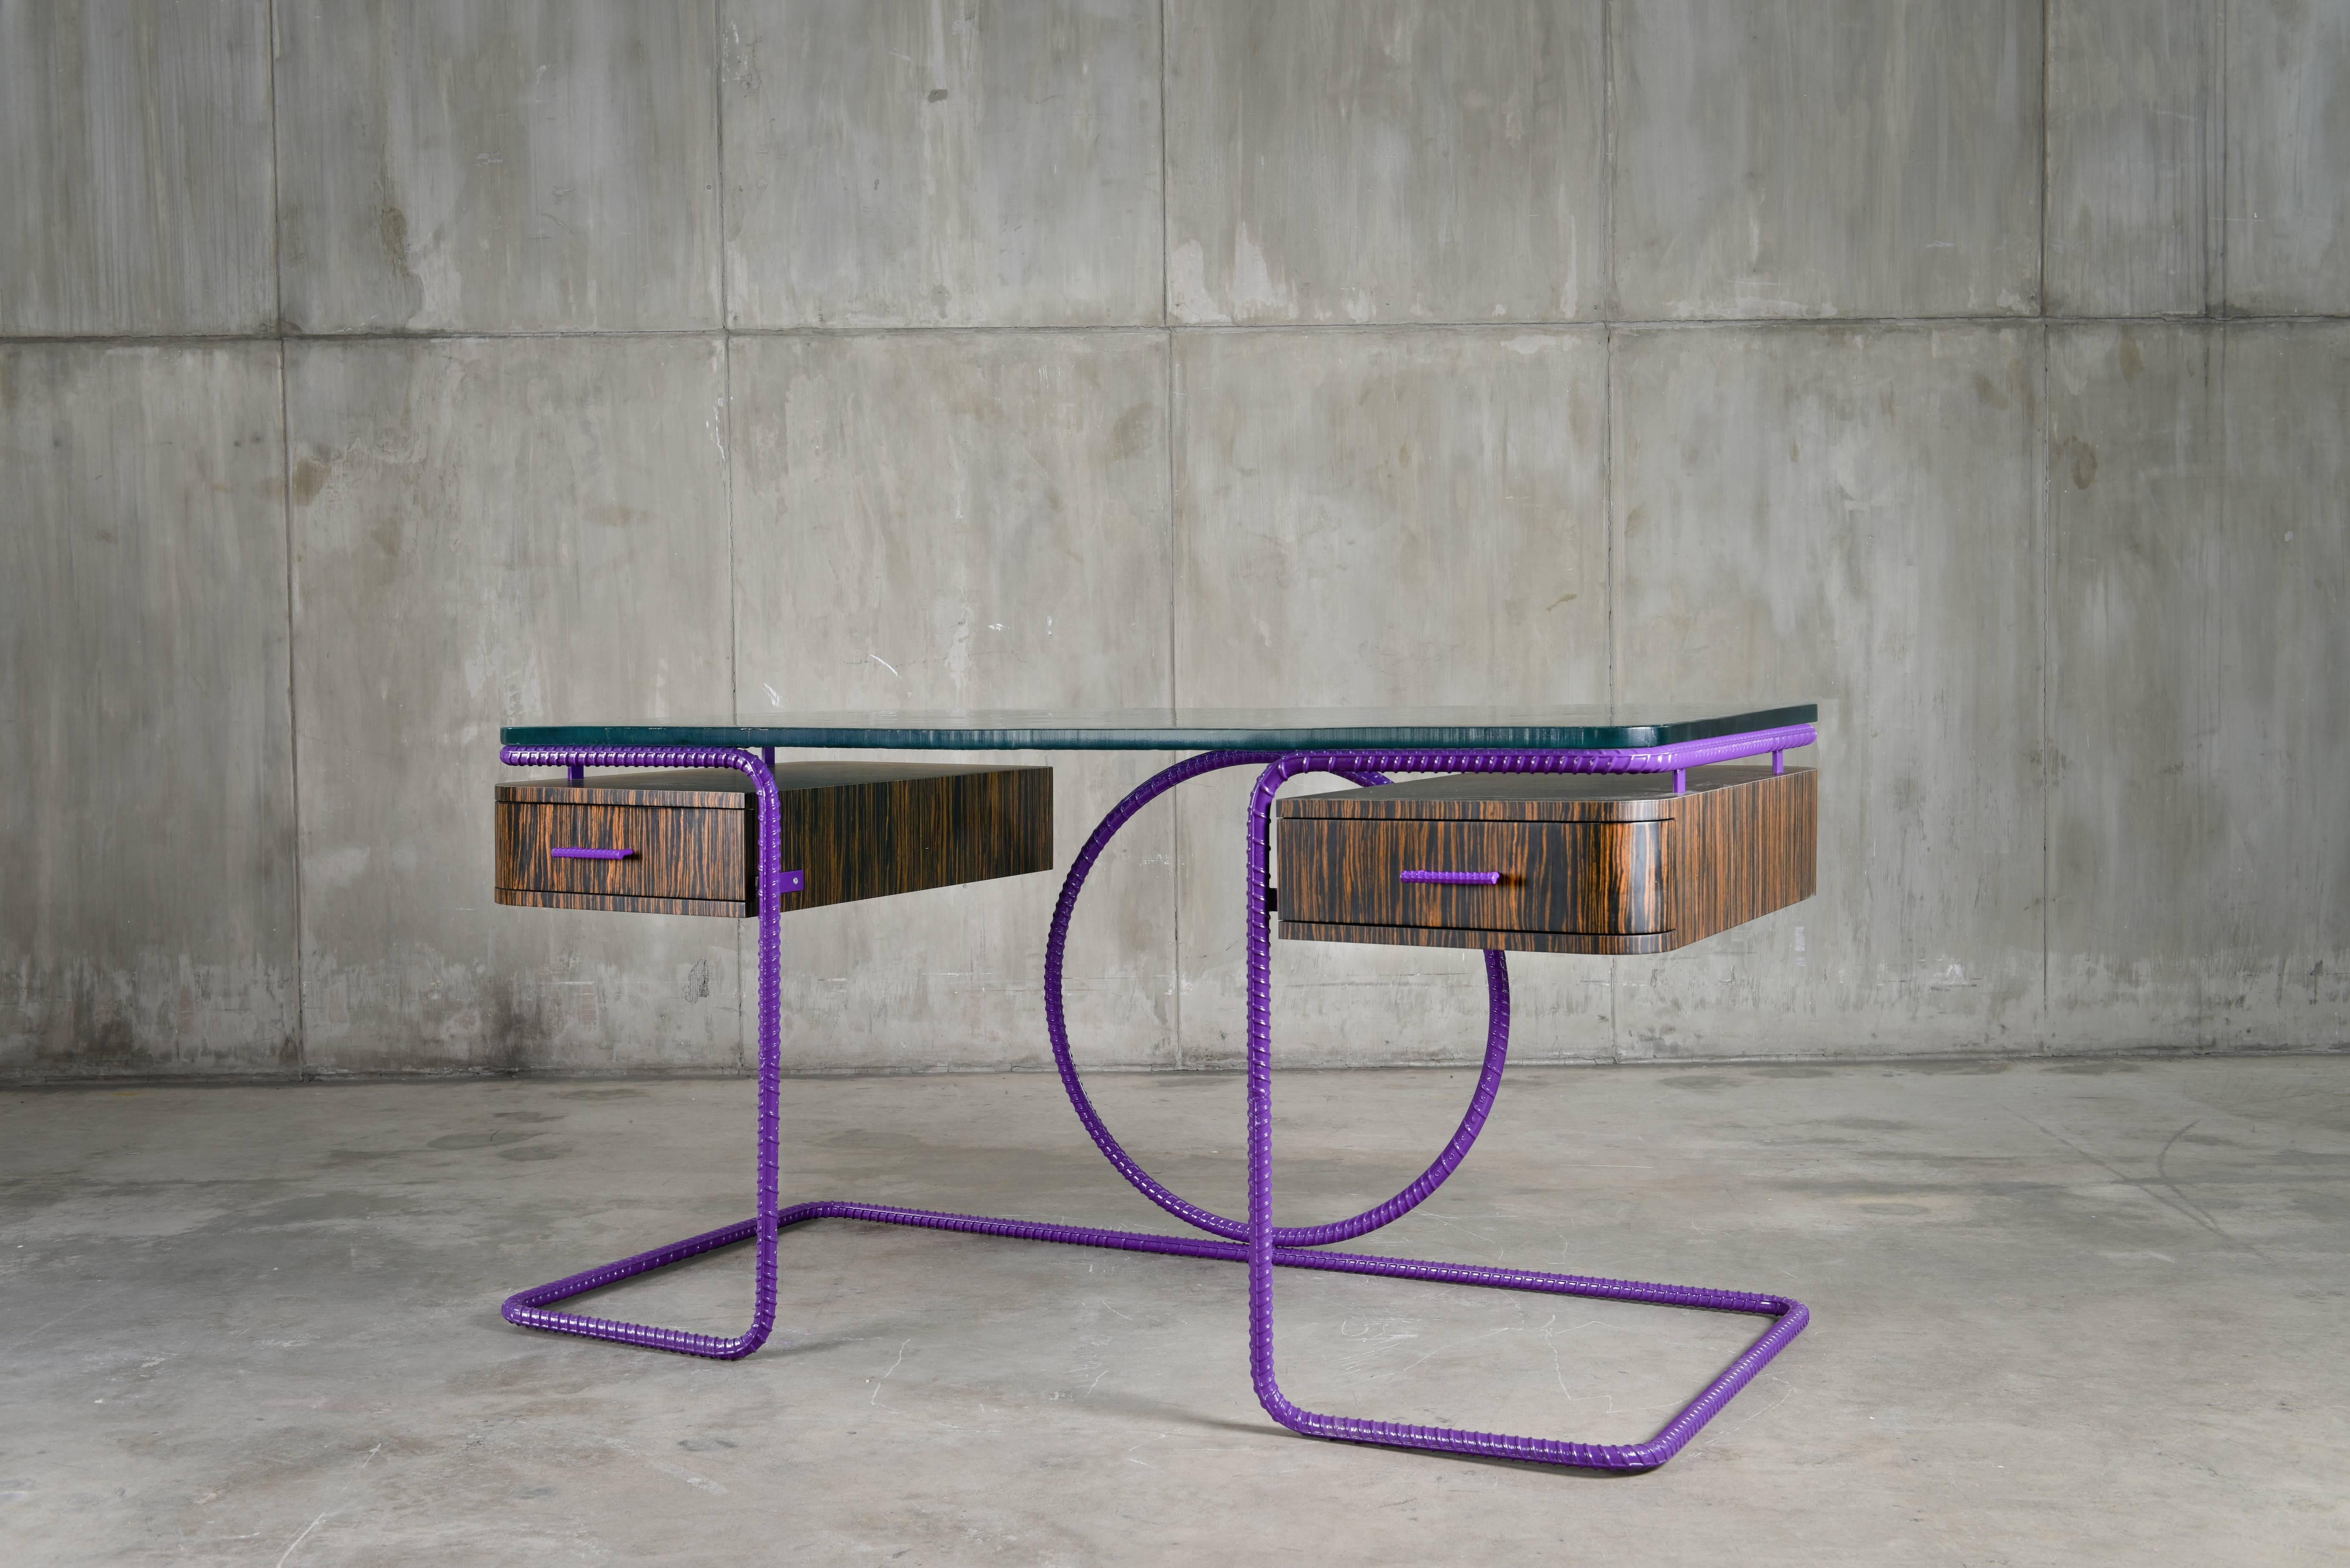 The Cleopatra Writing Desk is part of the Rebar series created by artist Troy Smith. 

Rebar is the steel used in the forming of concrete to give it strength. The rebar is heated with acetylene torches and red-hot forges. Skillfully sculpted by hand